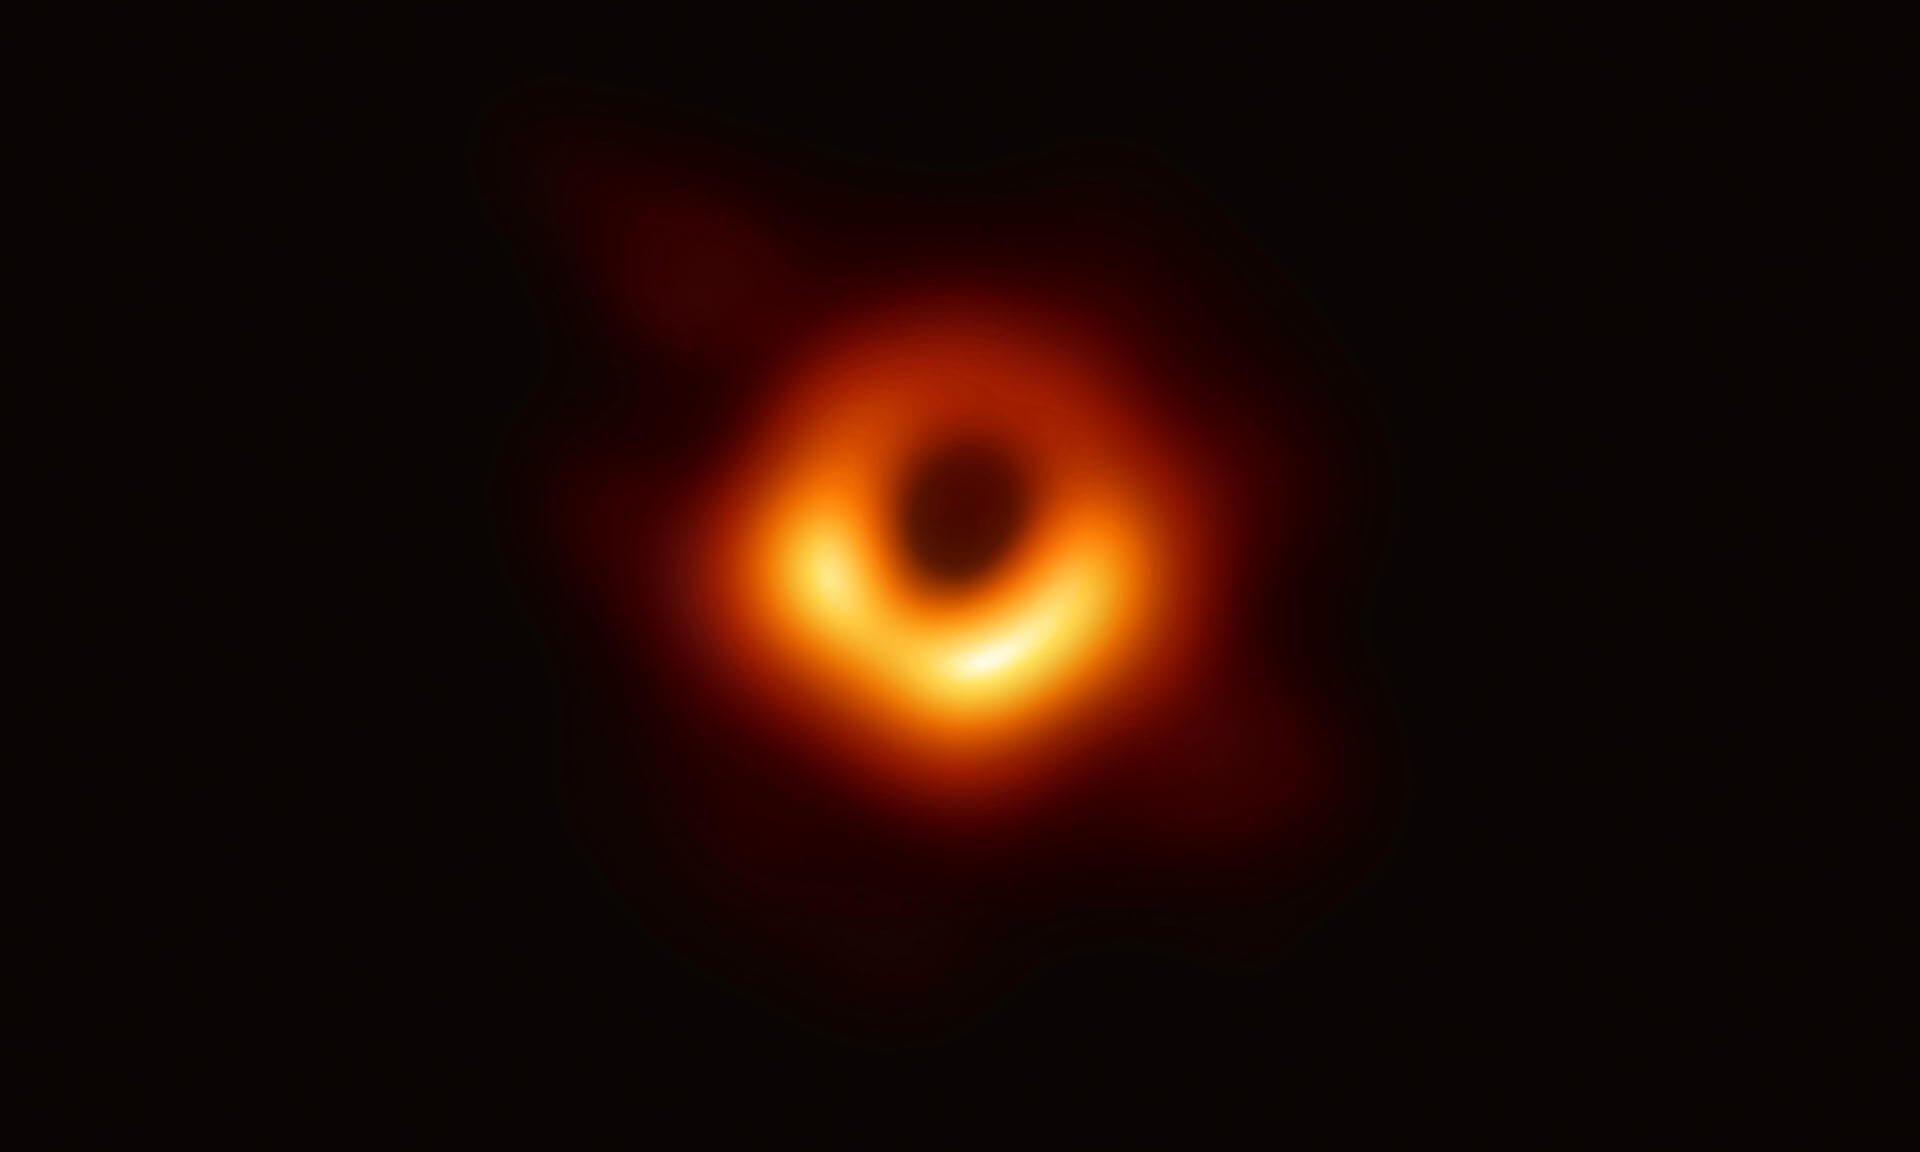 The first-ever image of a black hole has been released